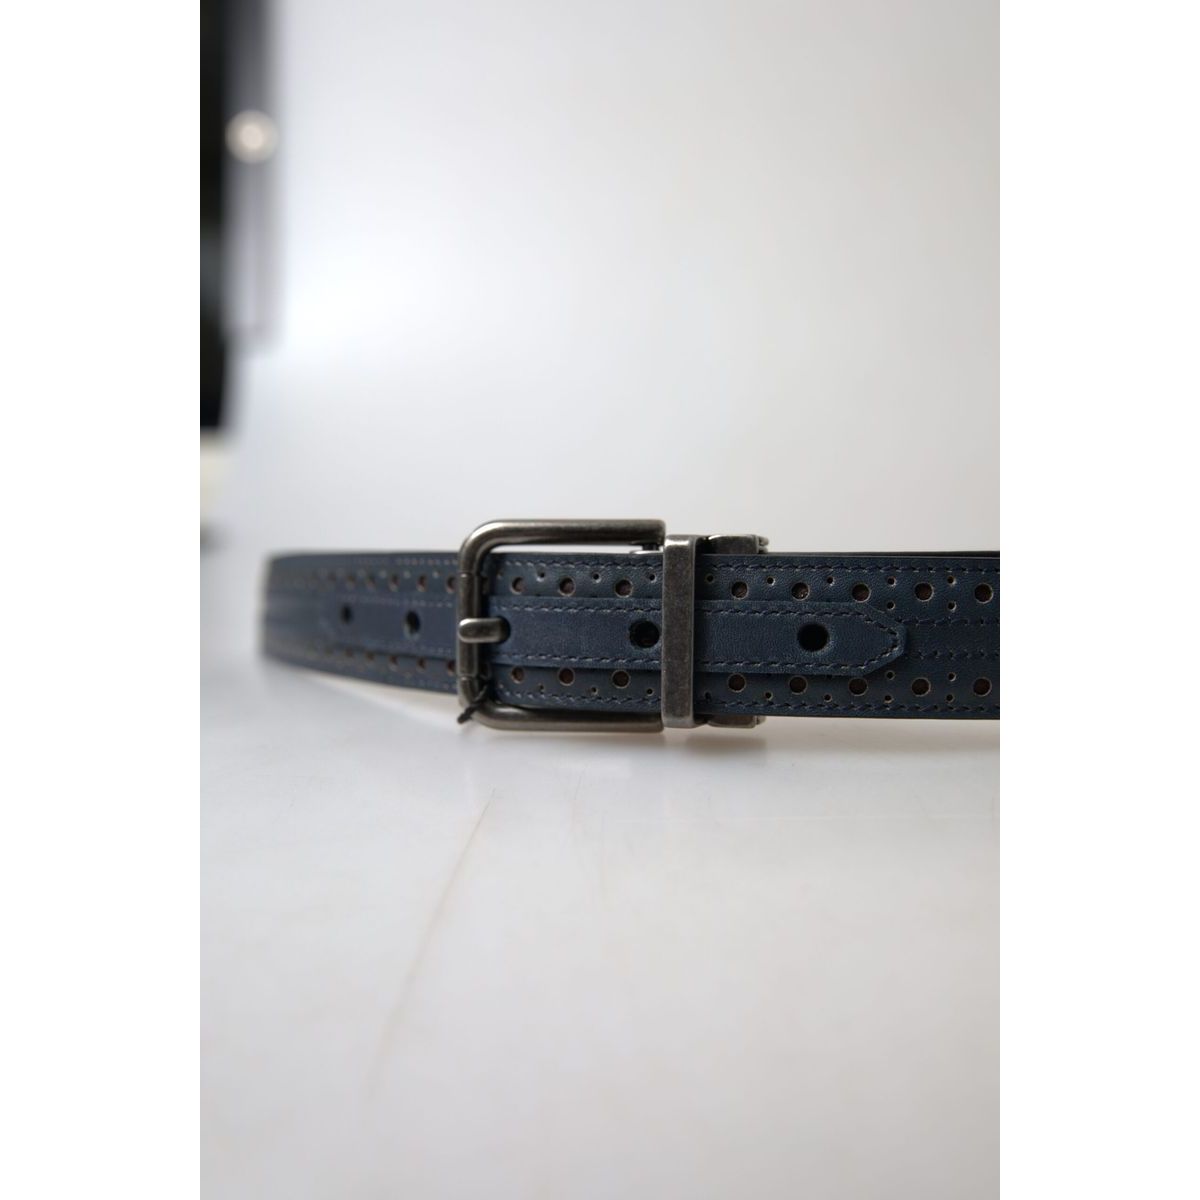 Dolce & Gabbana Elegant Blue Leather Belt with Metal Buckle MAN BELTS blue-leather-perforated-metal-buckle-belt 465A5251-scaled-a2e9667f-4fc.jpg